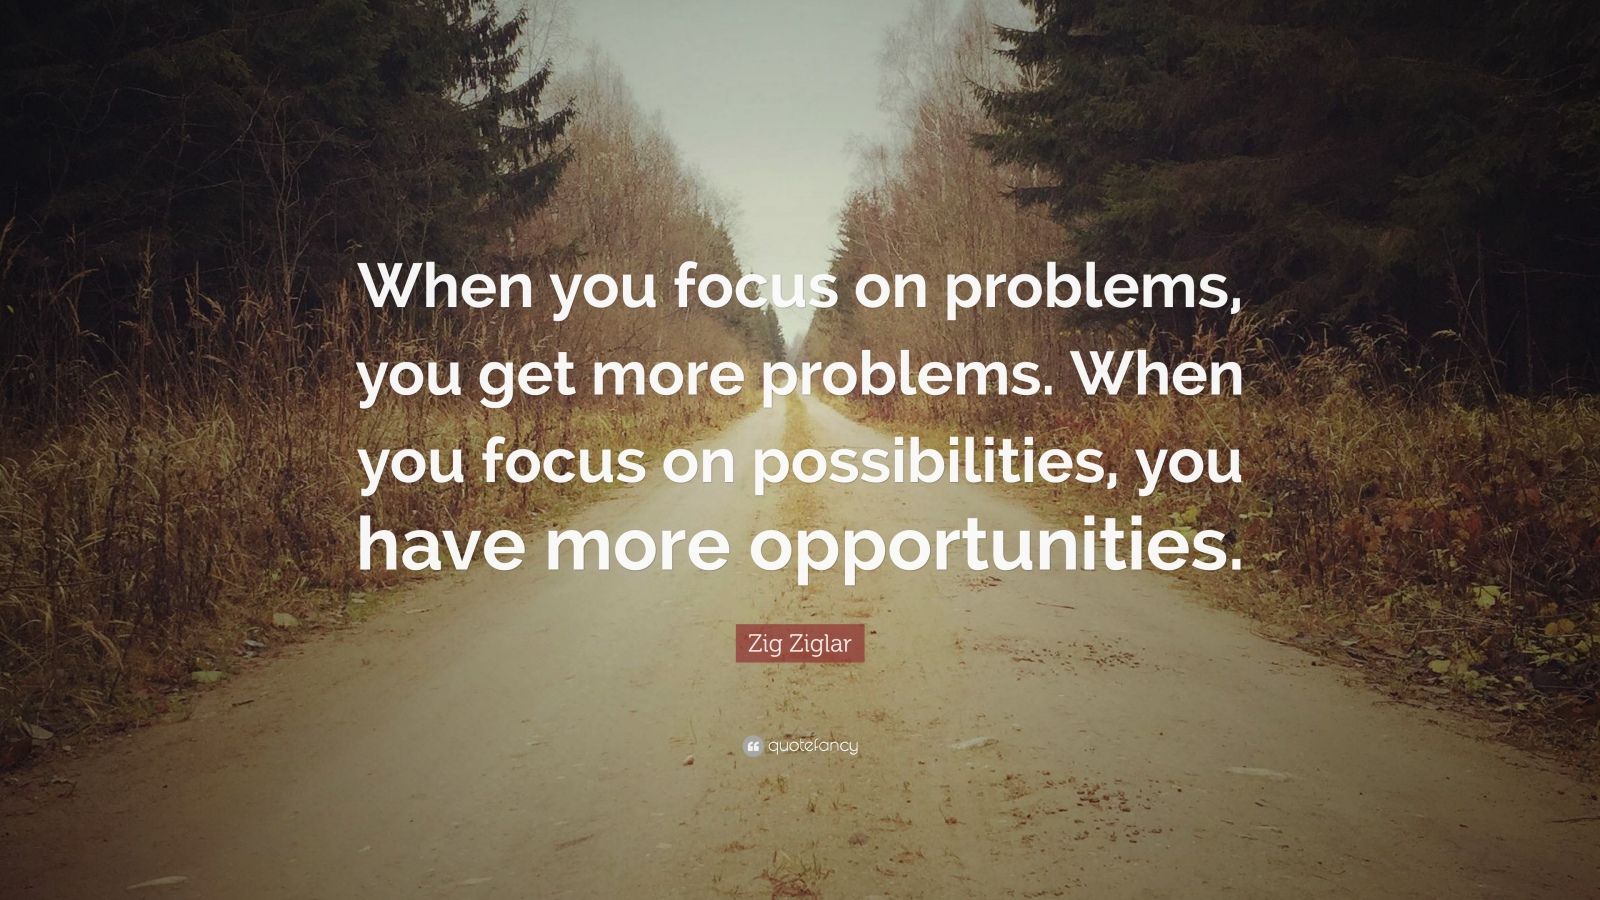 Zig Ziglar Quote: “When you focus on problems, you get more problems. When you focus on possibilities, you have more opportunities.”